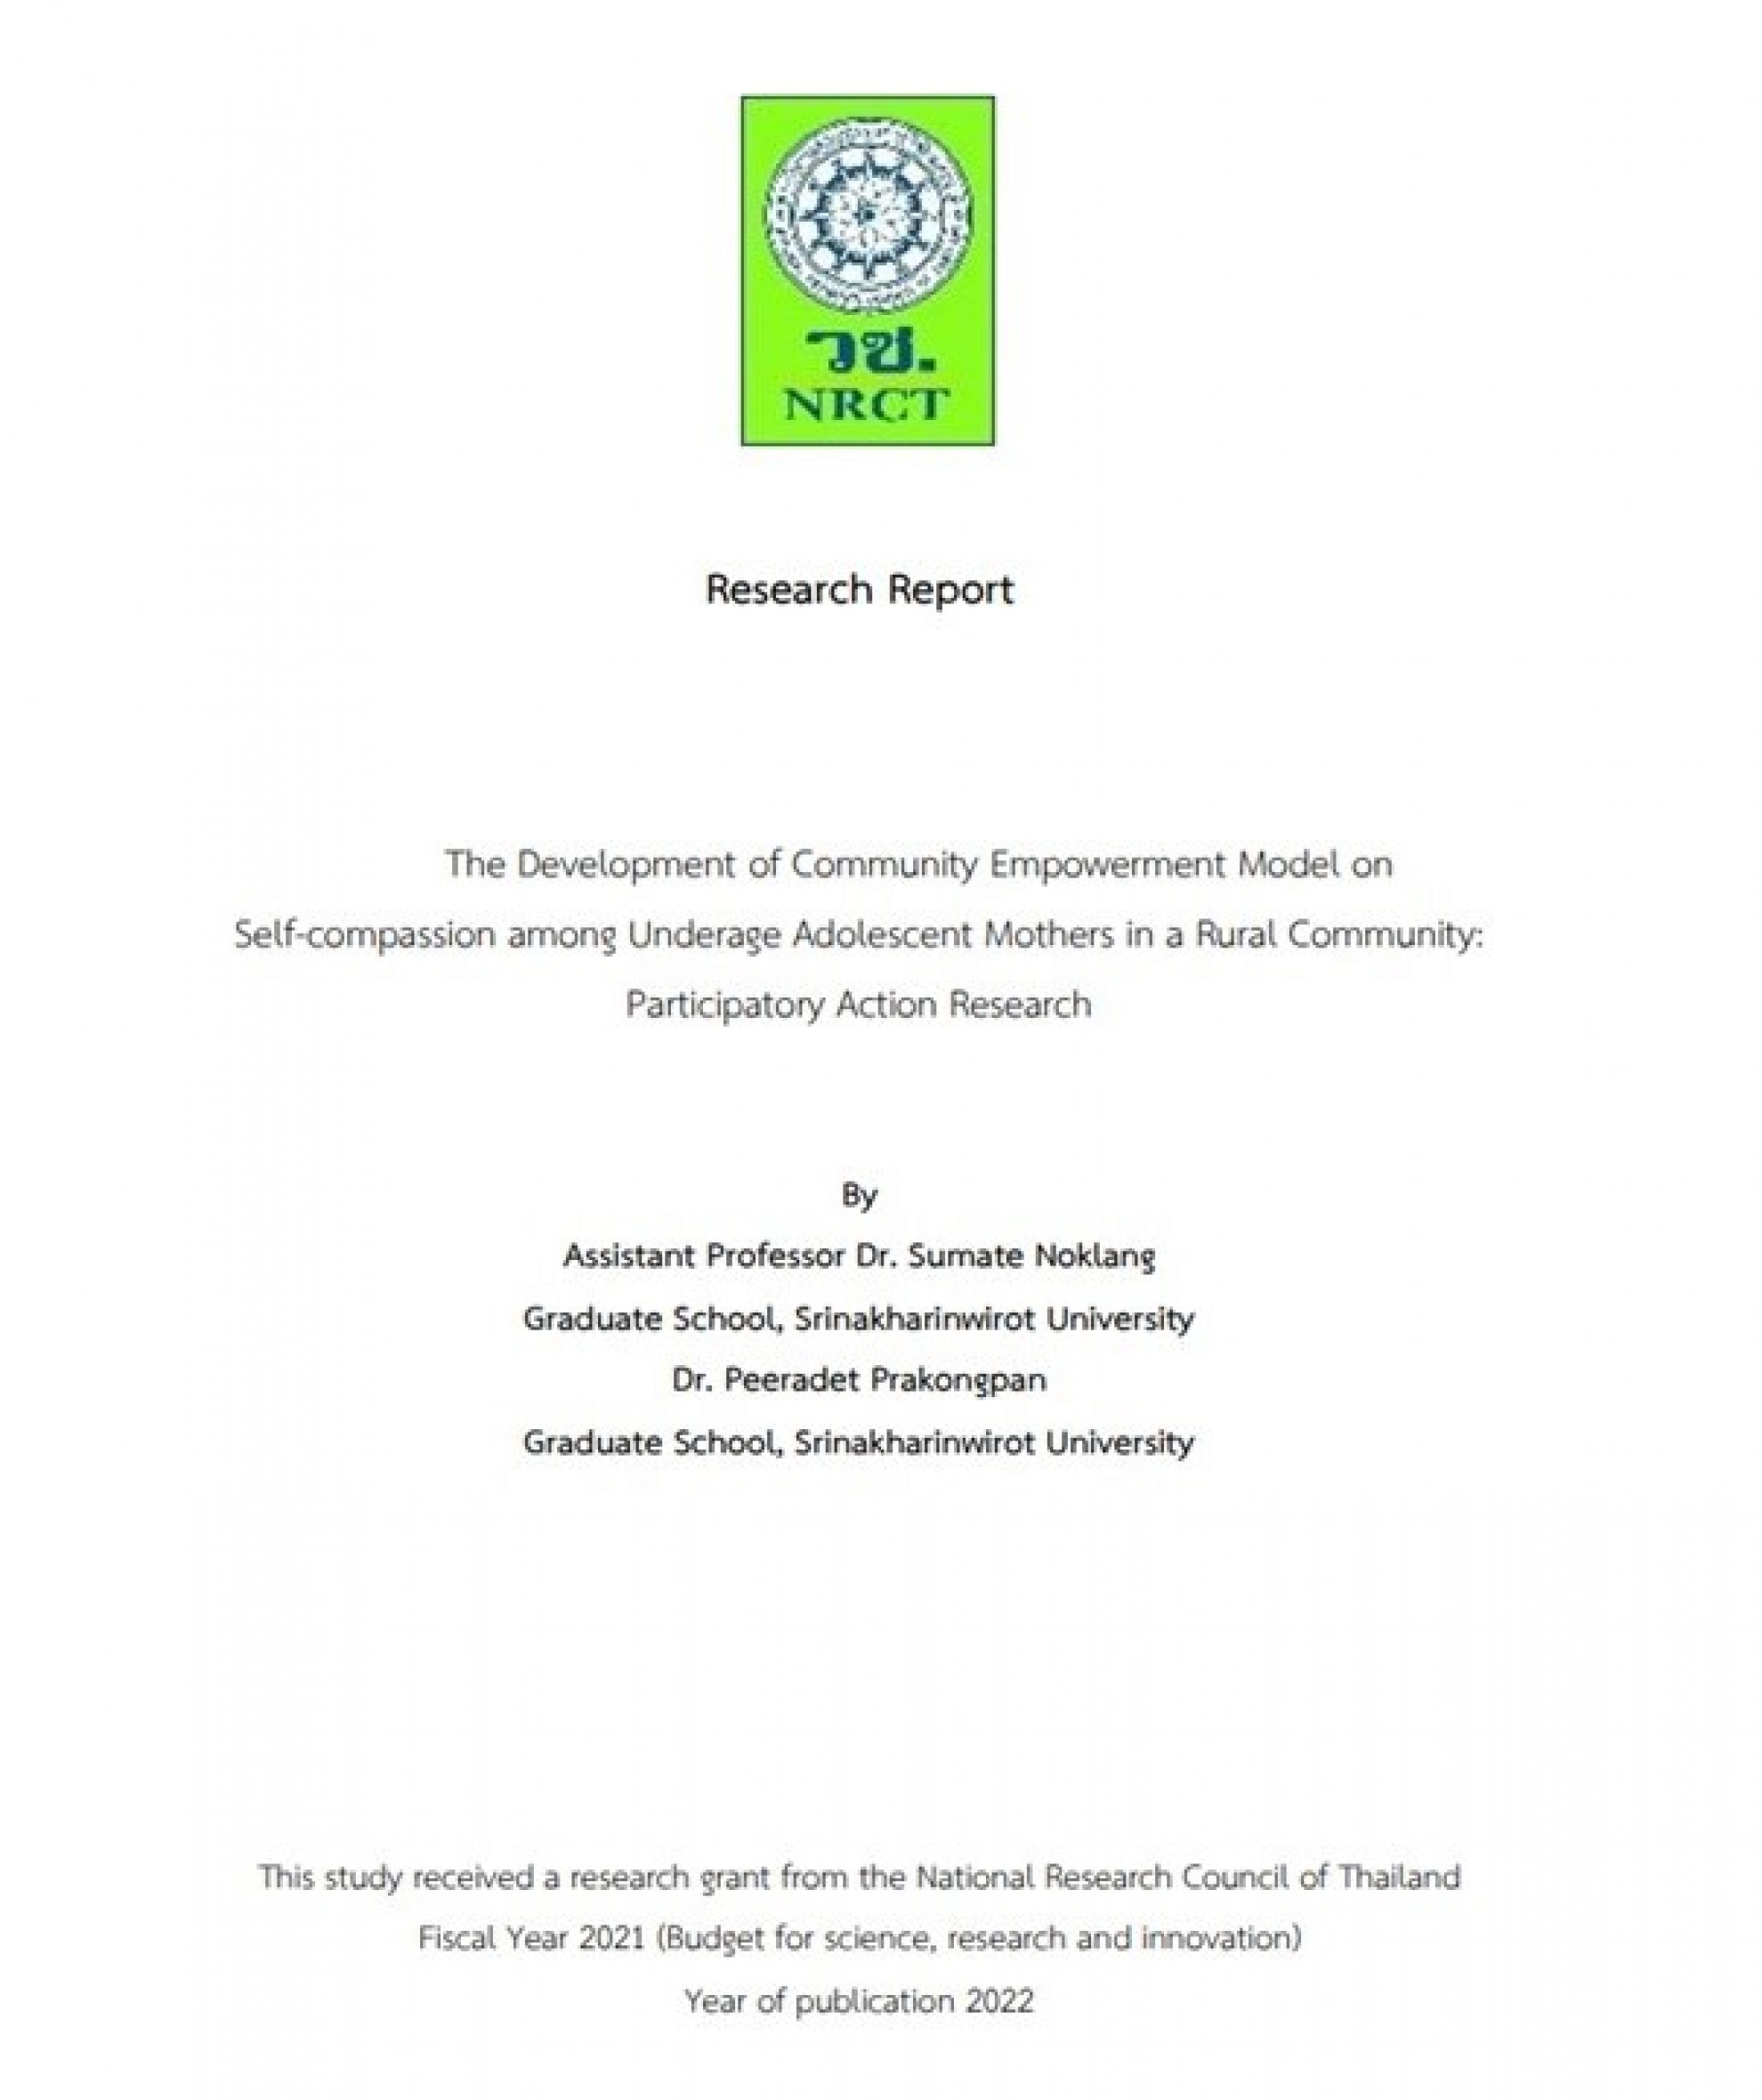 Full Paper submitted to National Research Centre